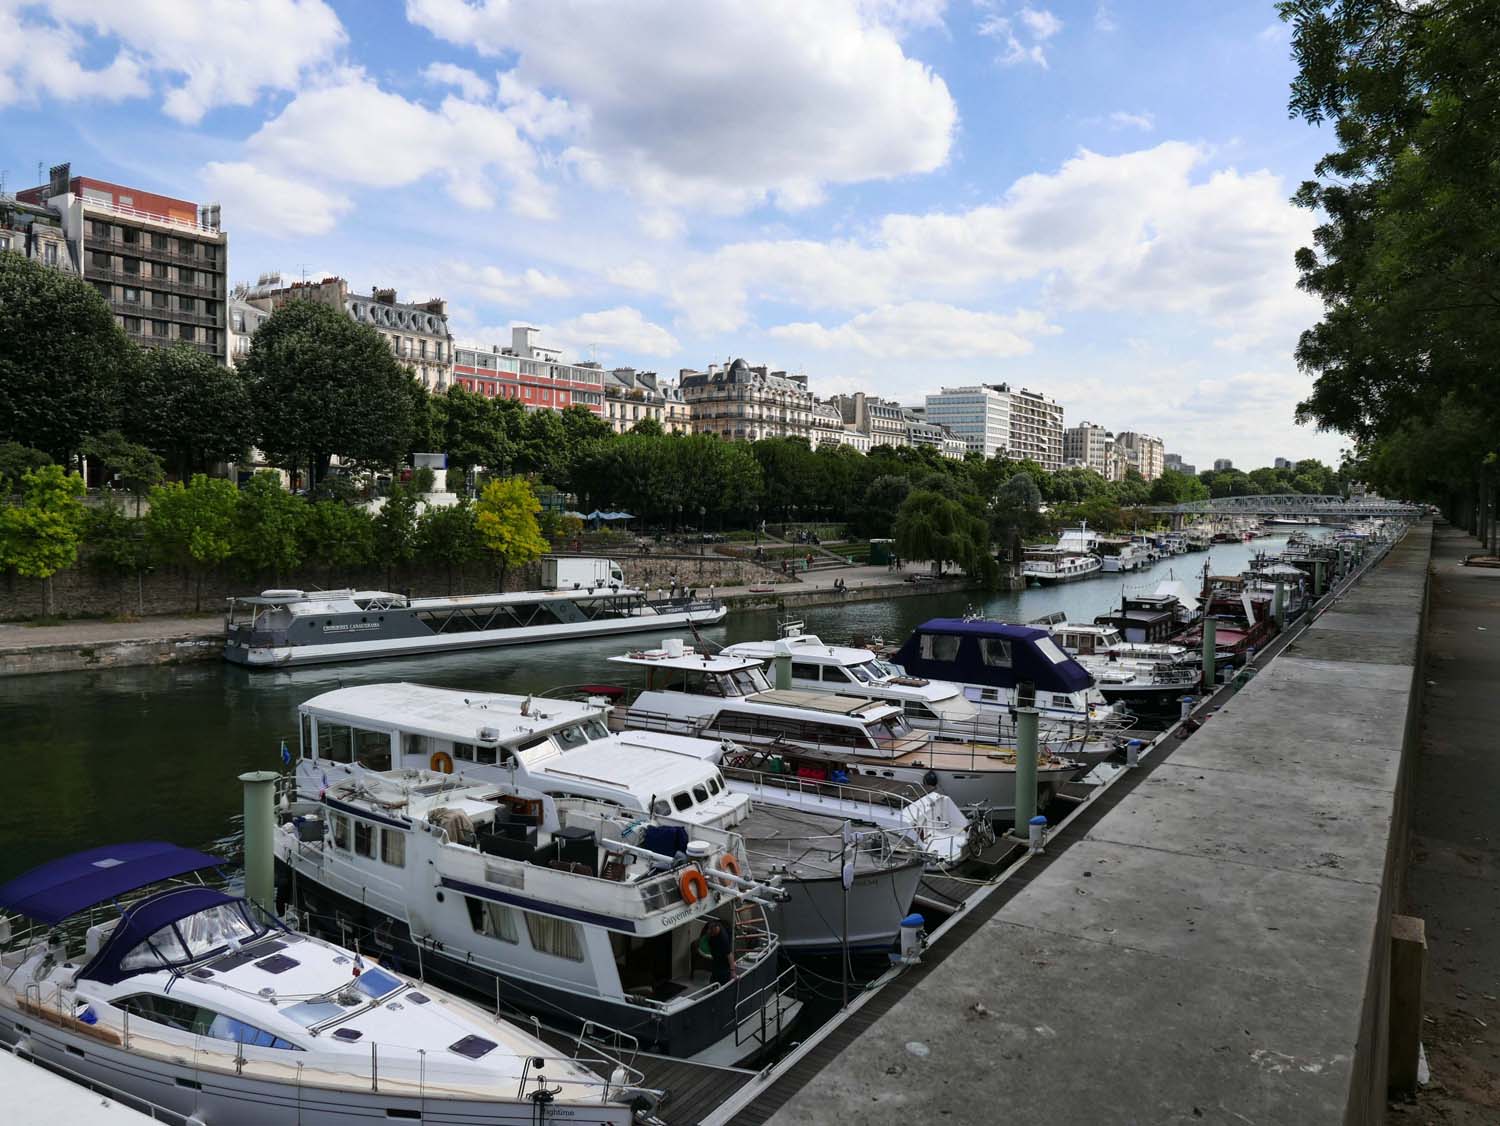 The other end of Canal St. Martin, near Bastille